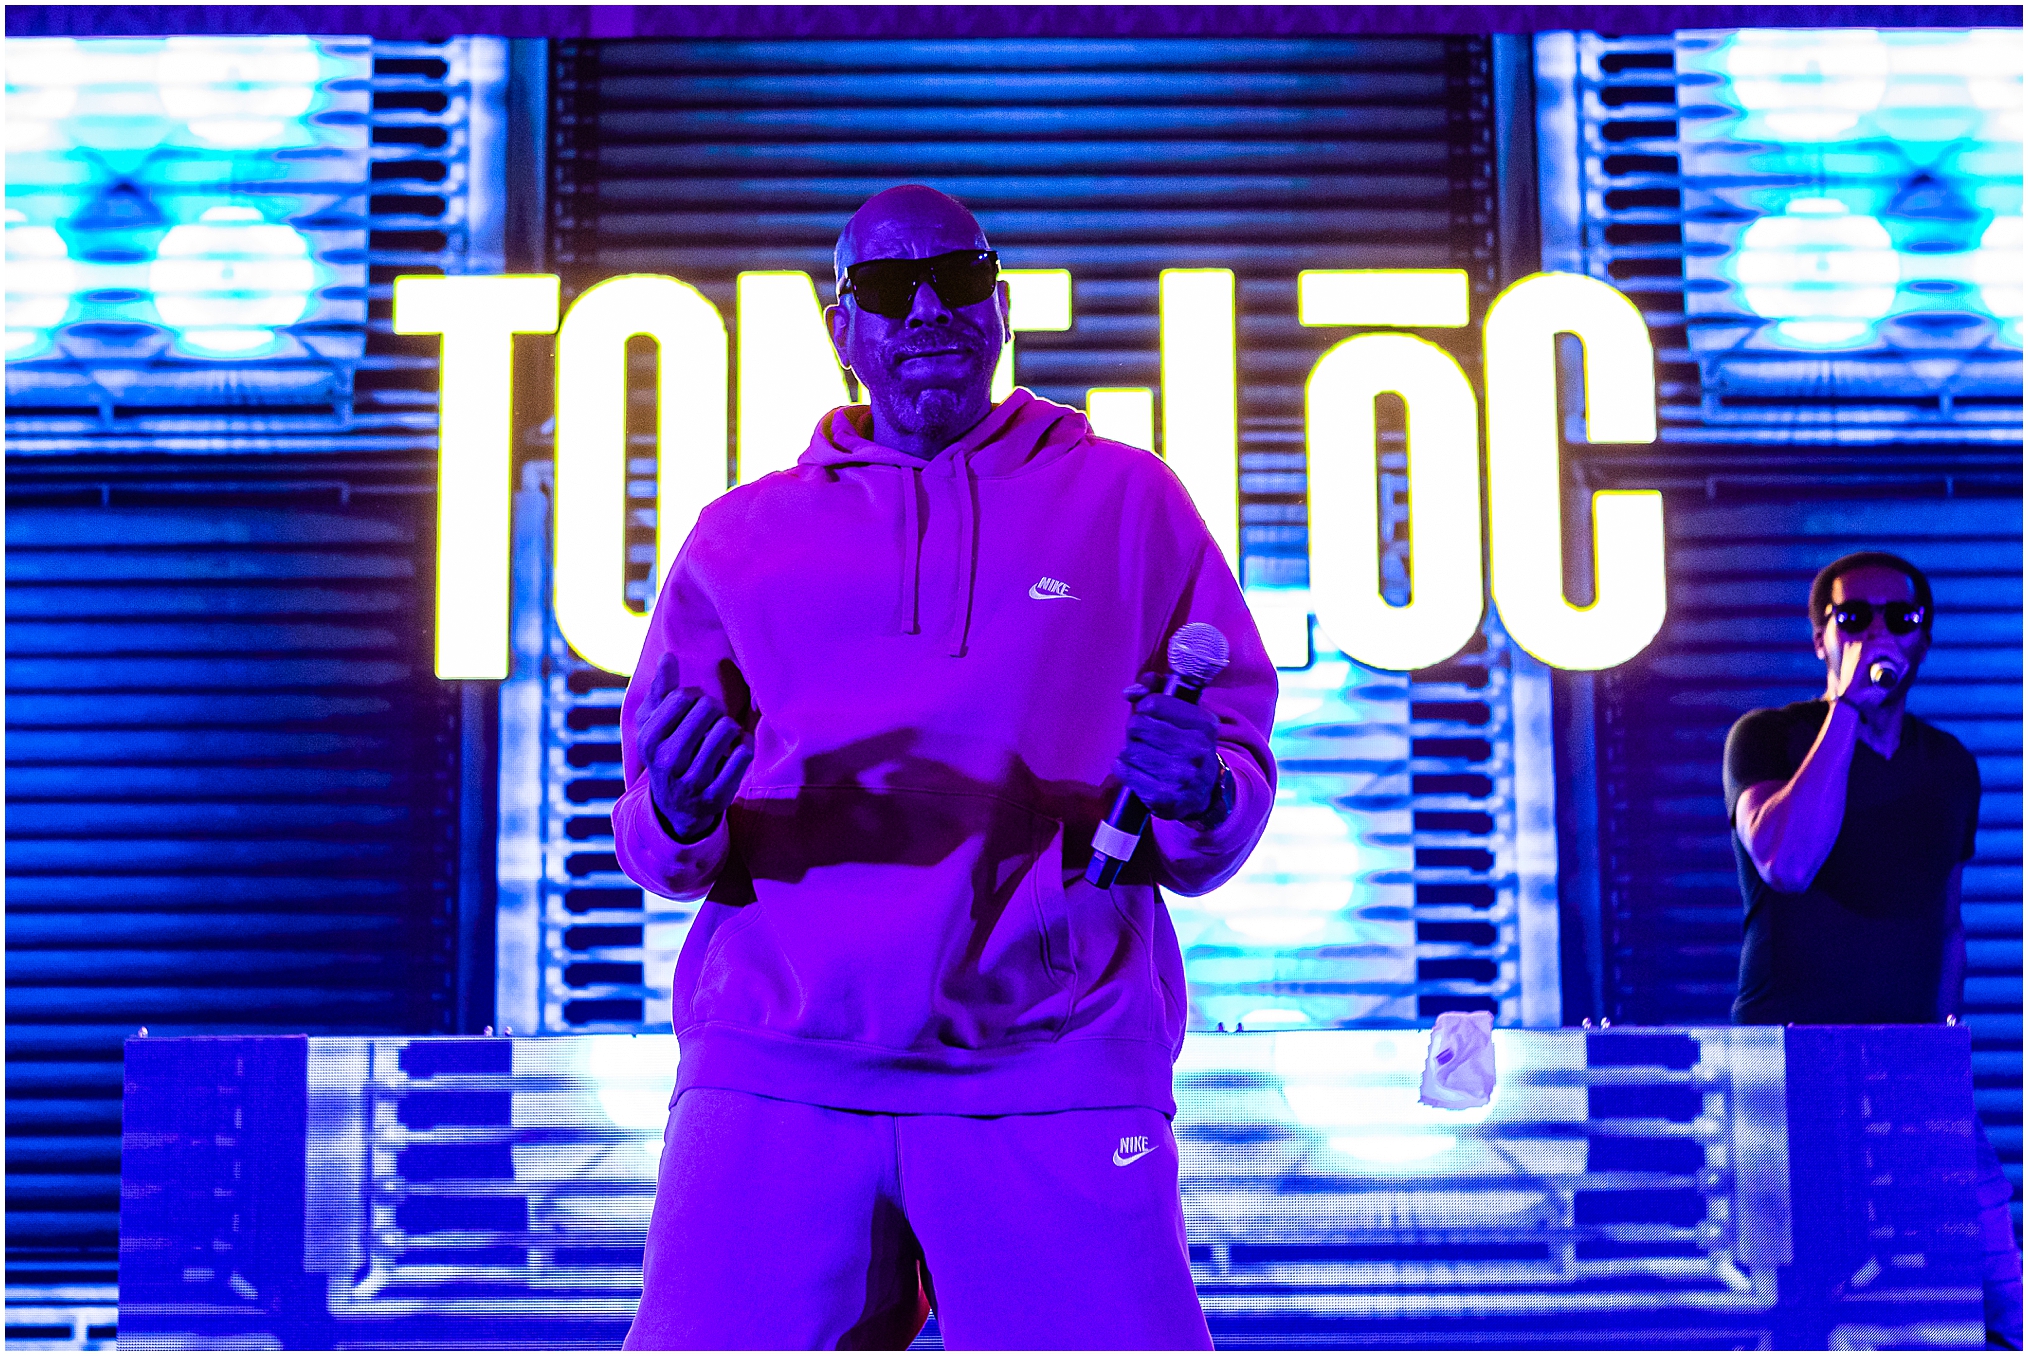 Tone Lōc with Turbo B for private event.